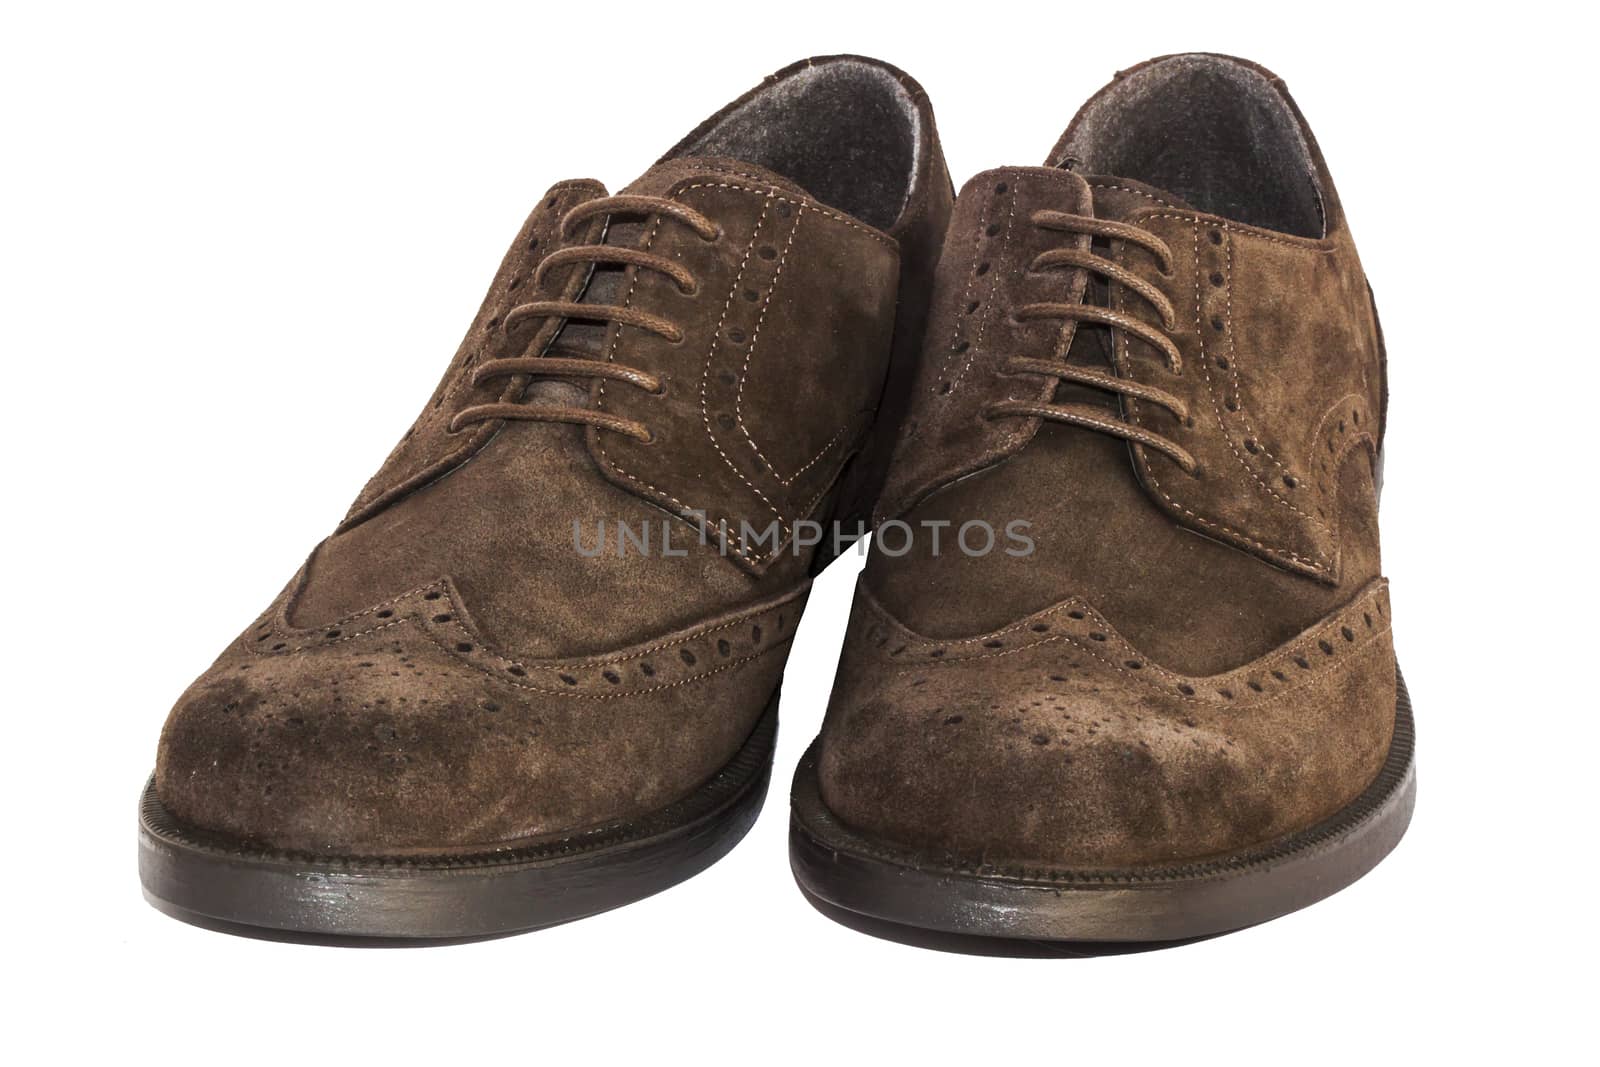 brown suede shoes by Chechotkin